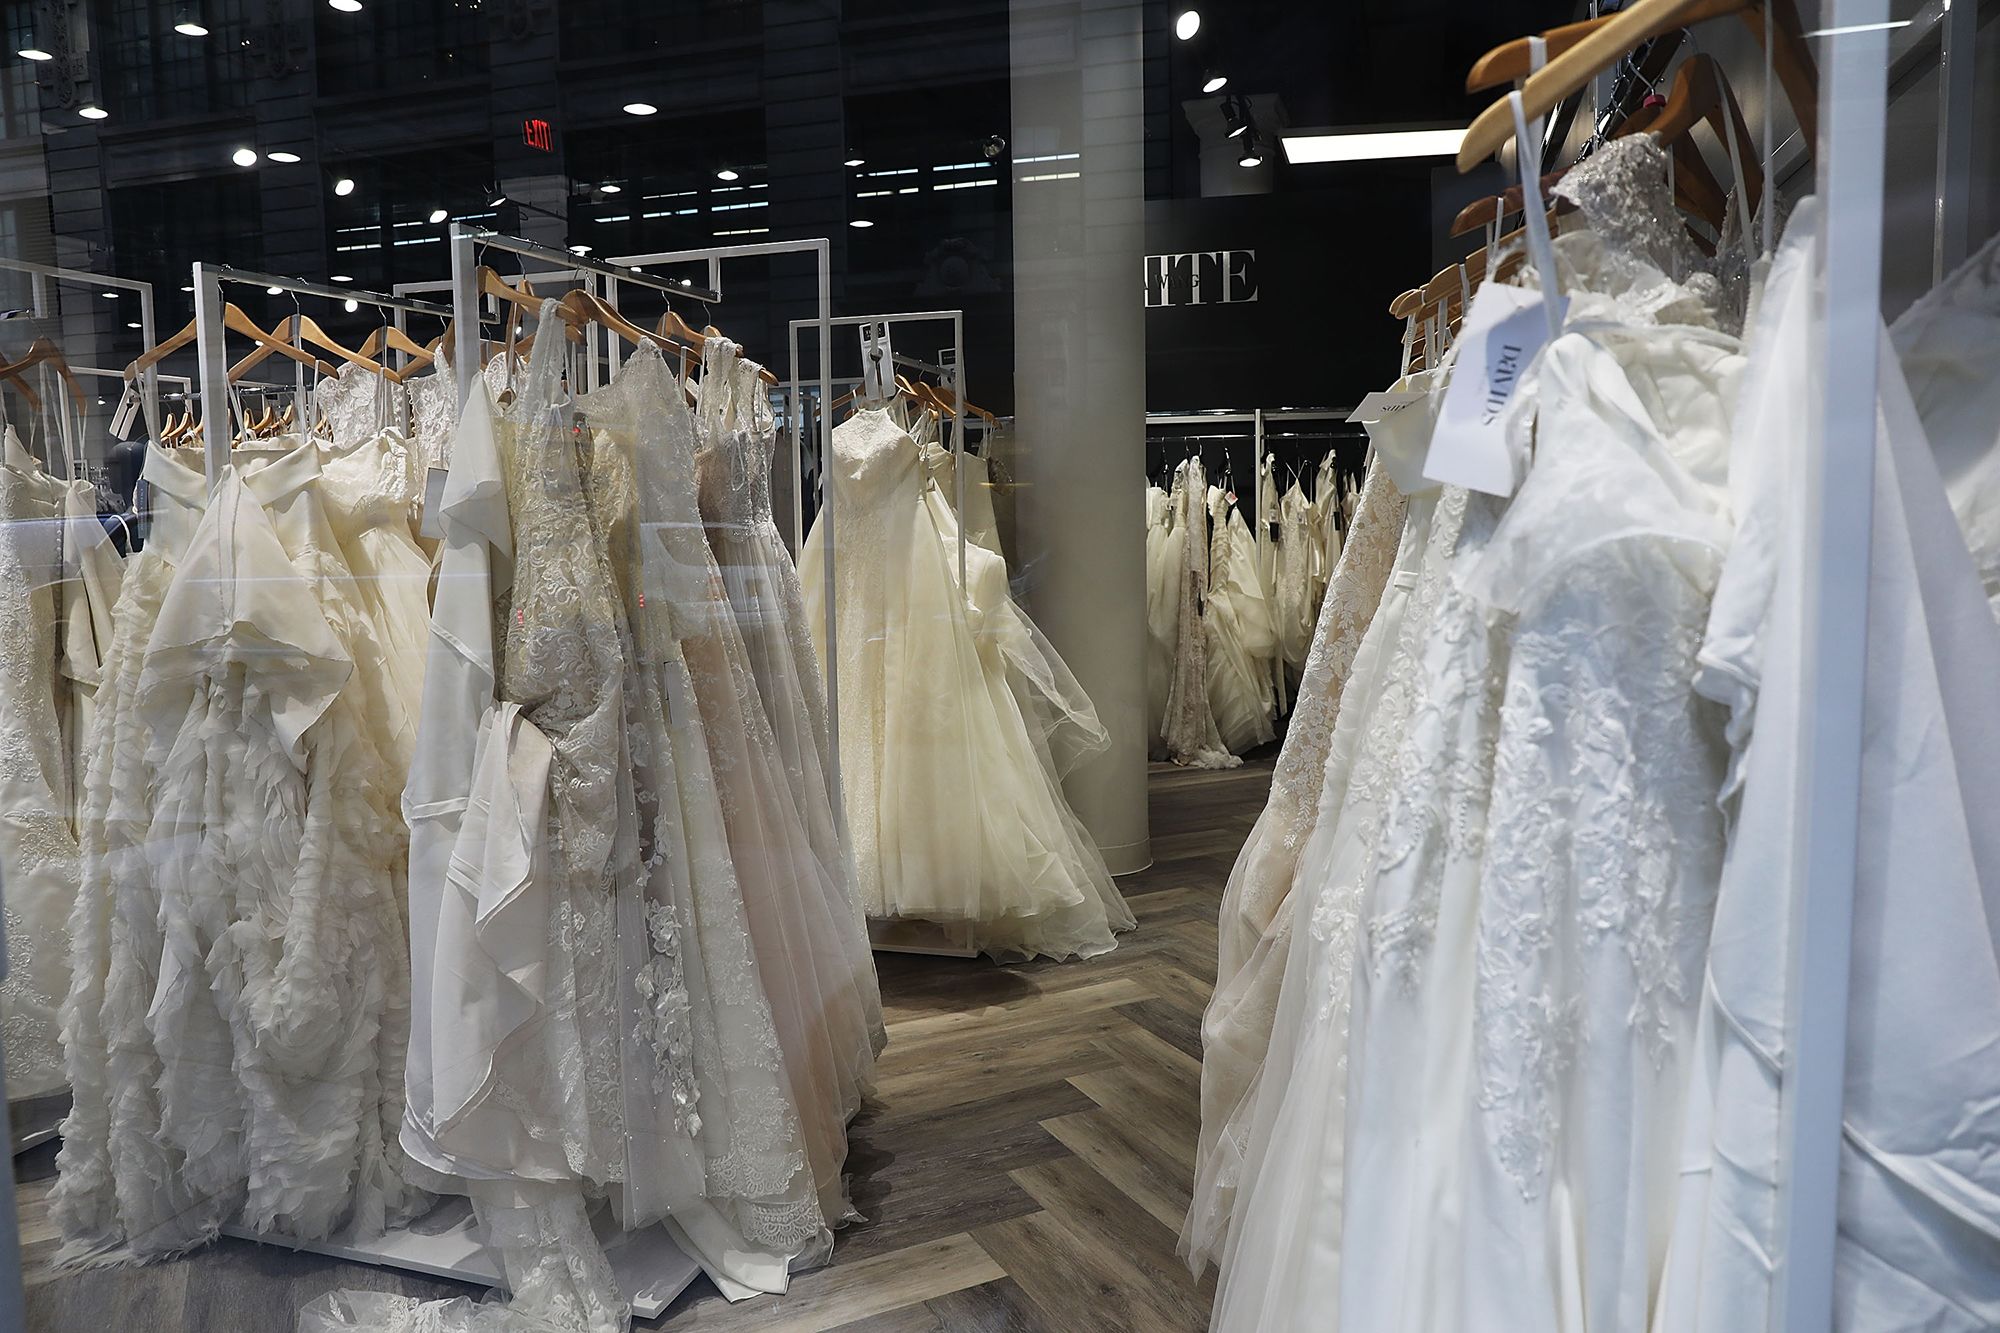 David's Bridal Has A New Owner, And More Time For Its Turnaround